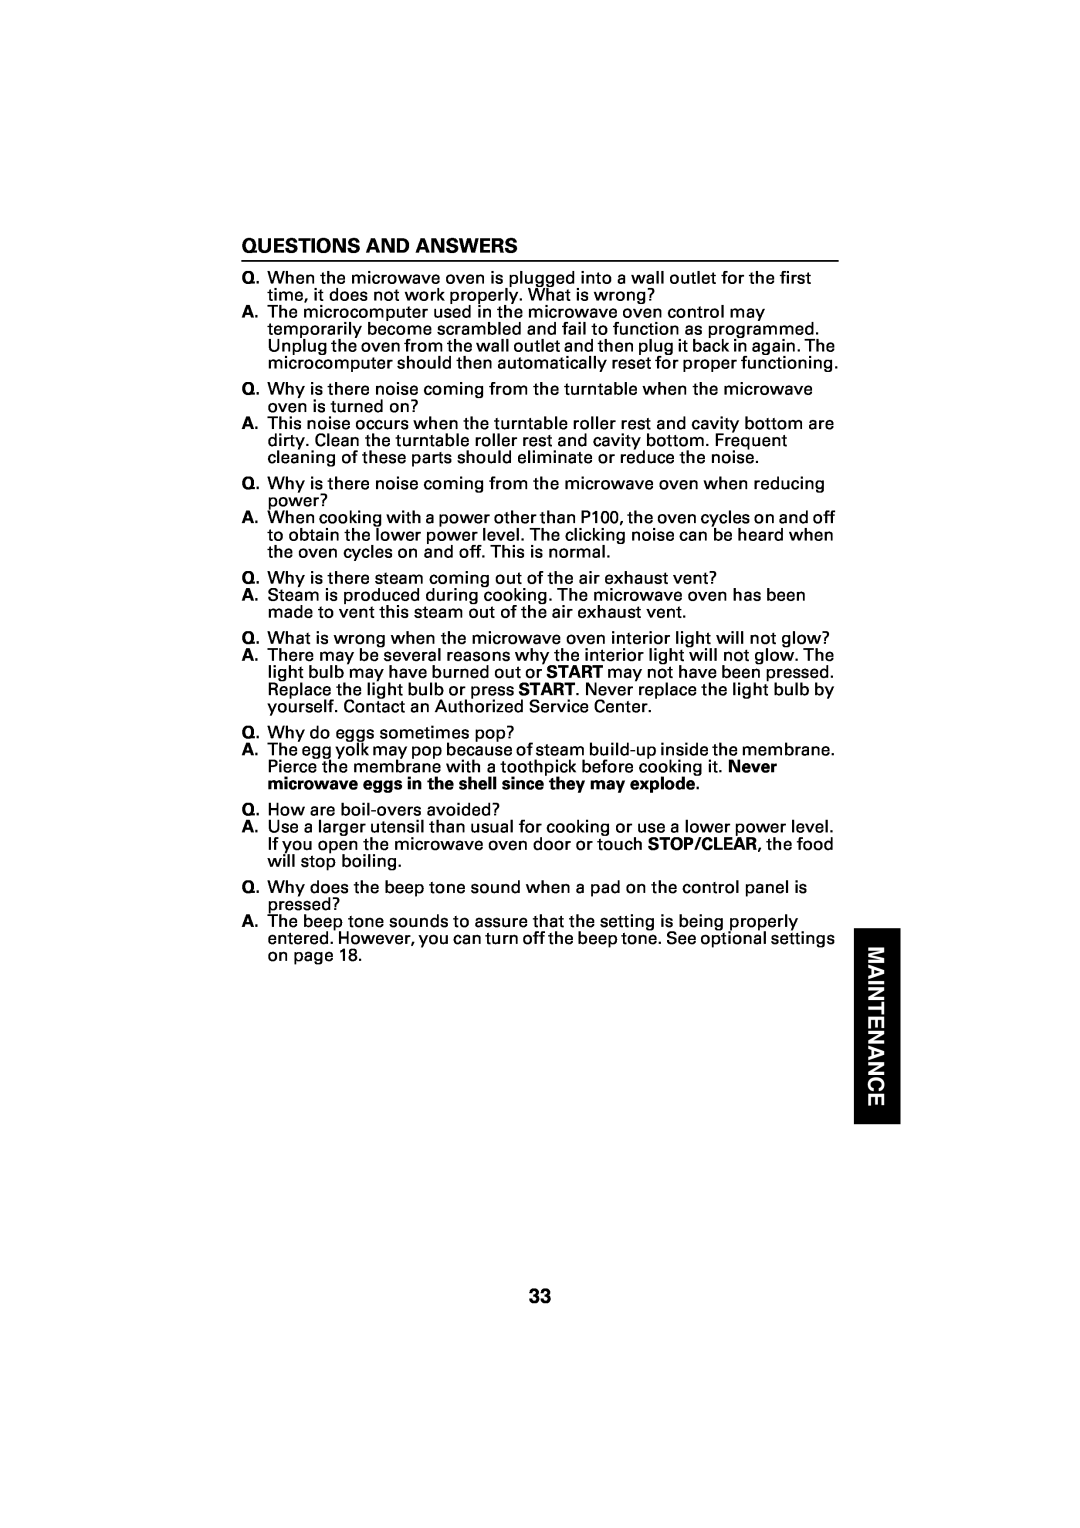 Maytag UMC5100AD, Microwave Oven manual Questions And Answers 